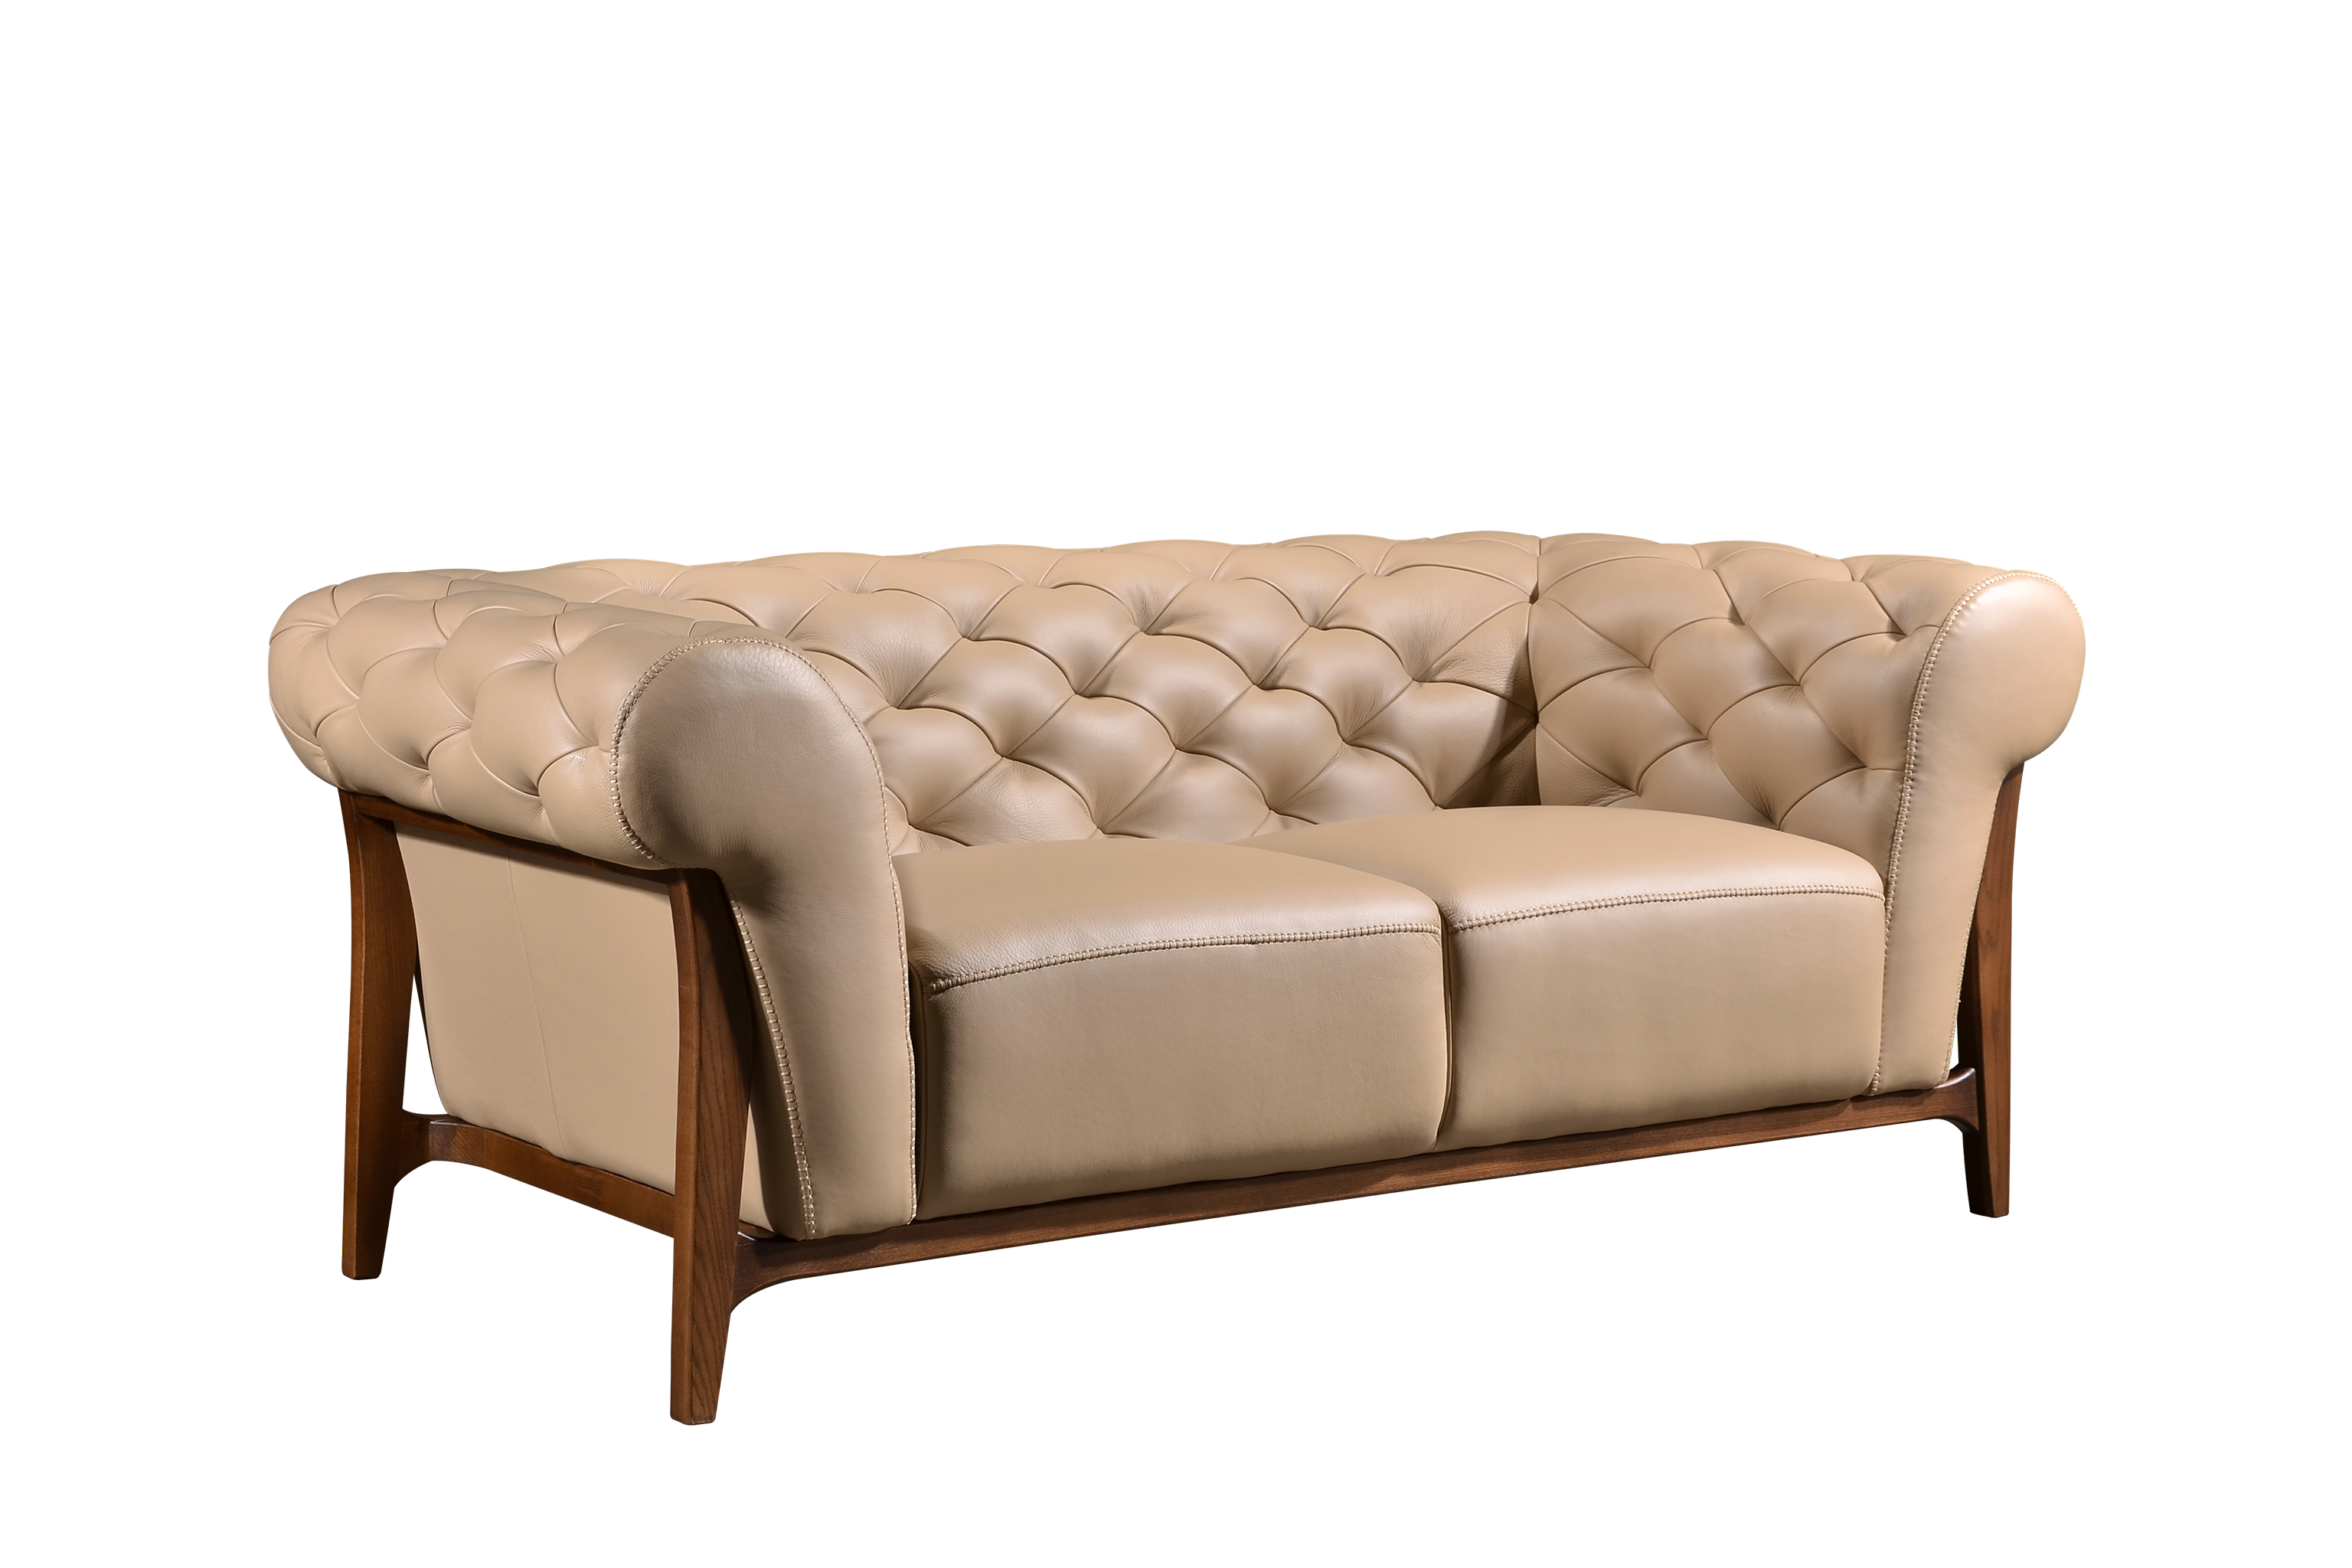 VINCENZO 3 Seater Sofa In Leather By Castilla